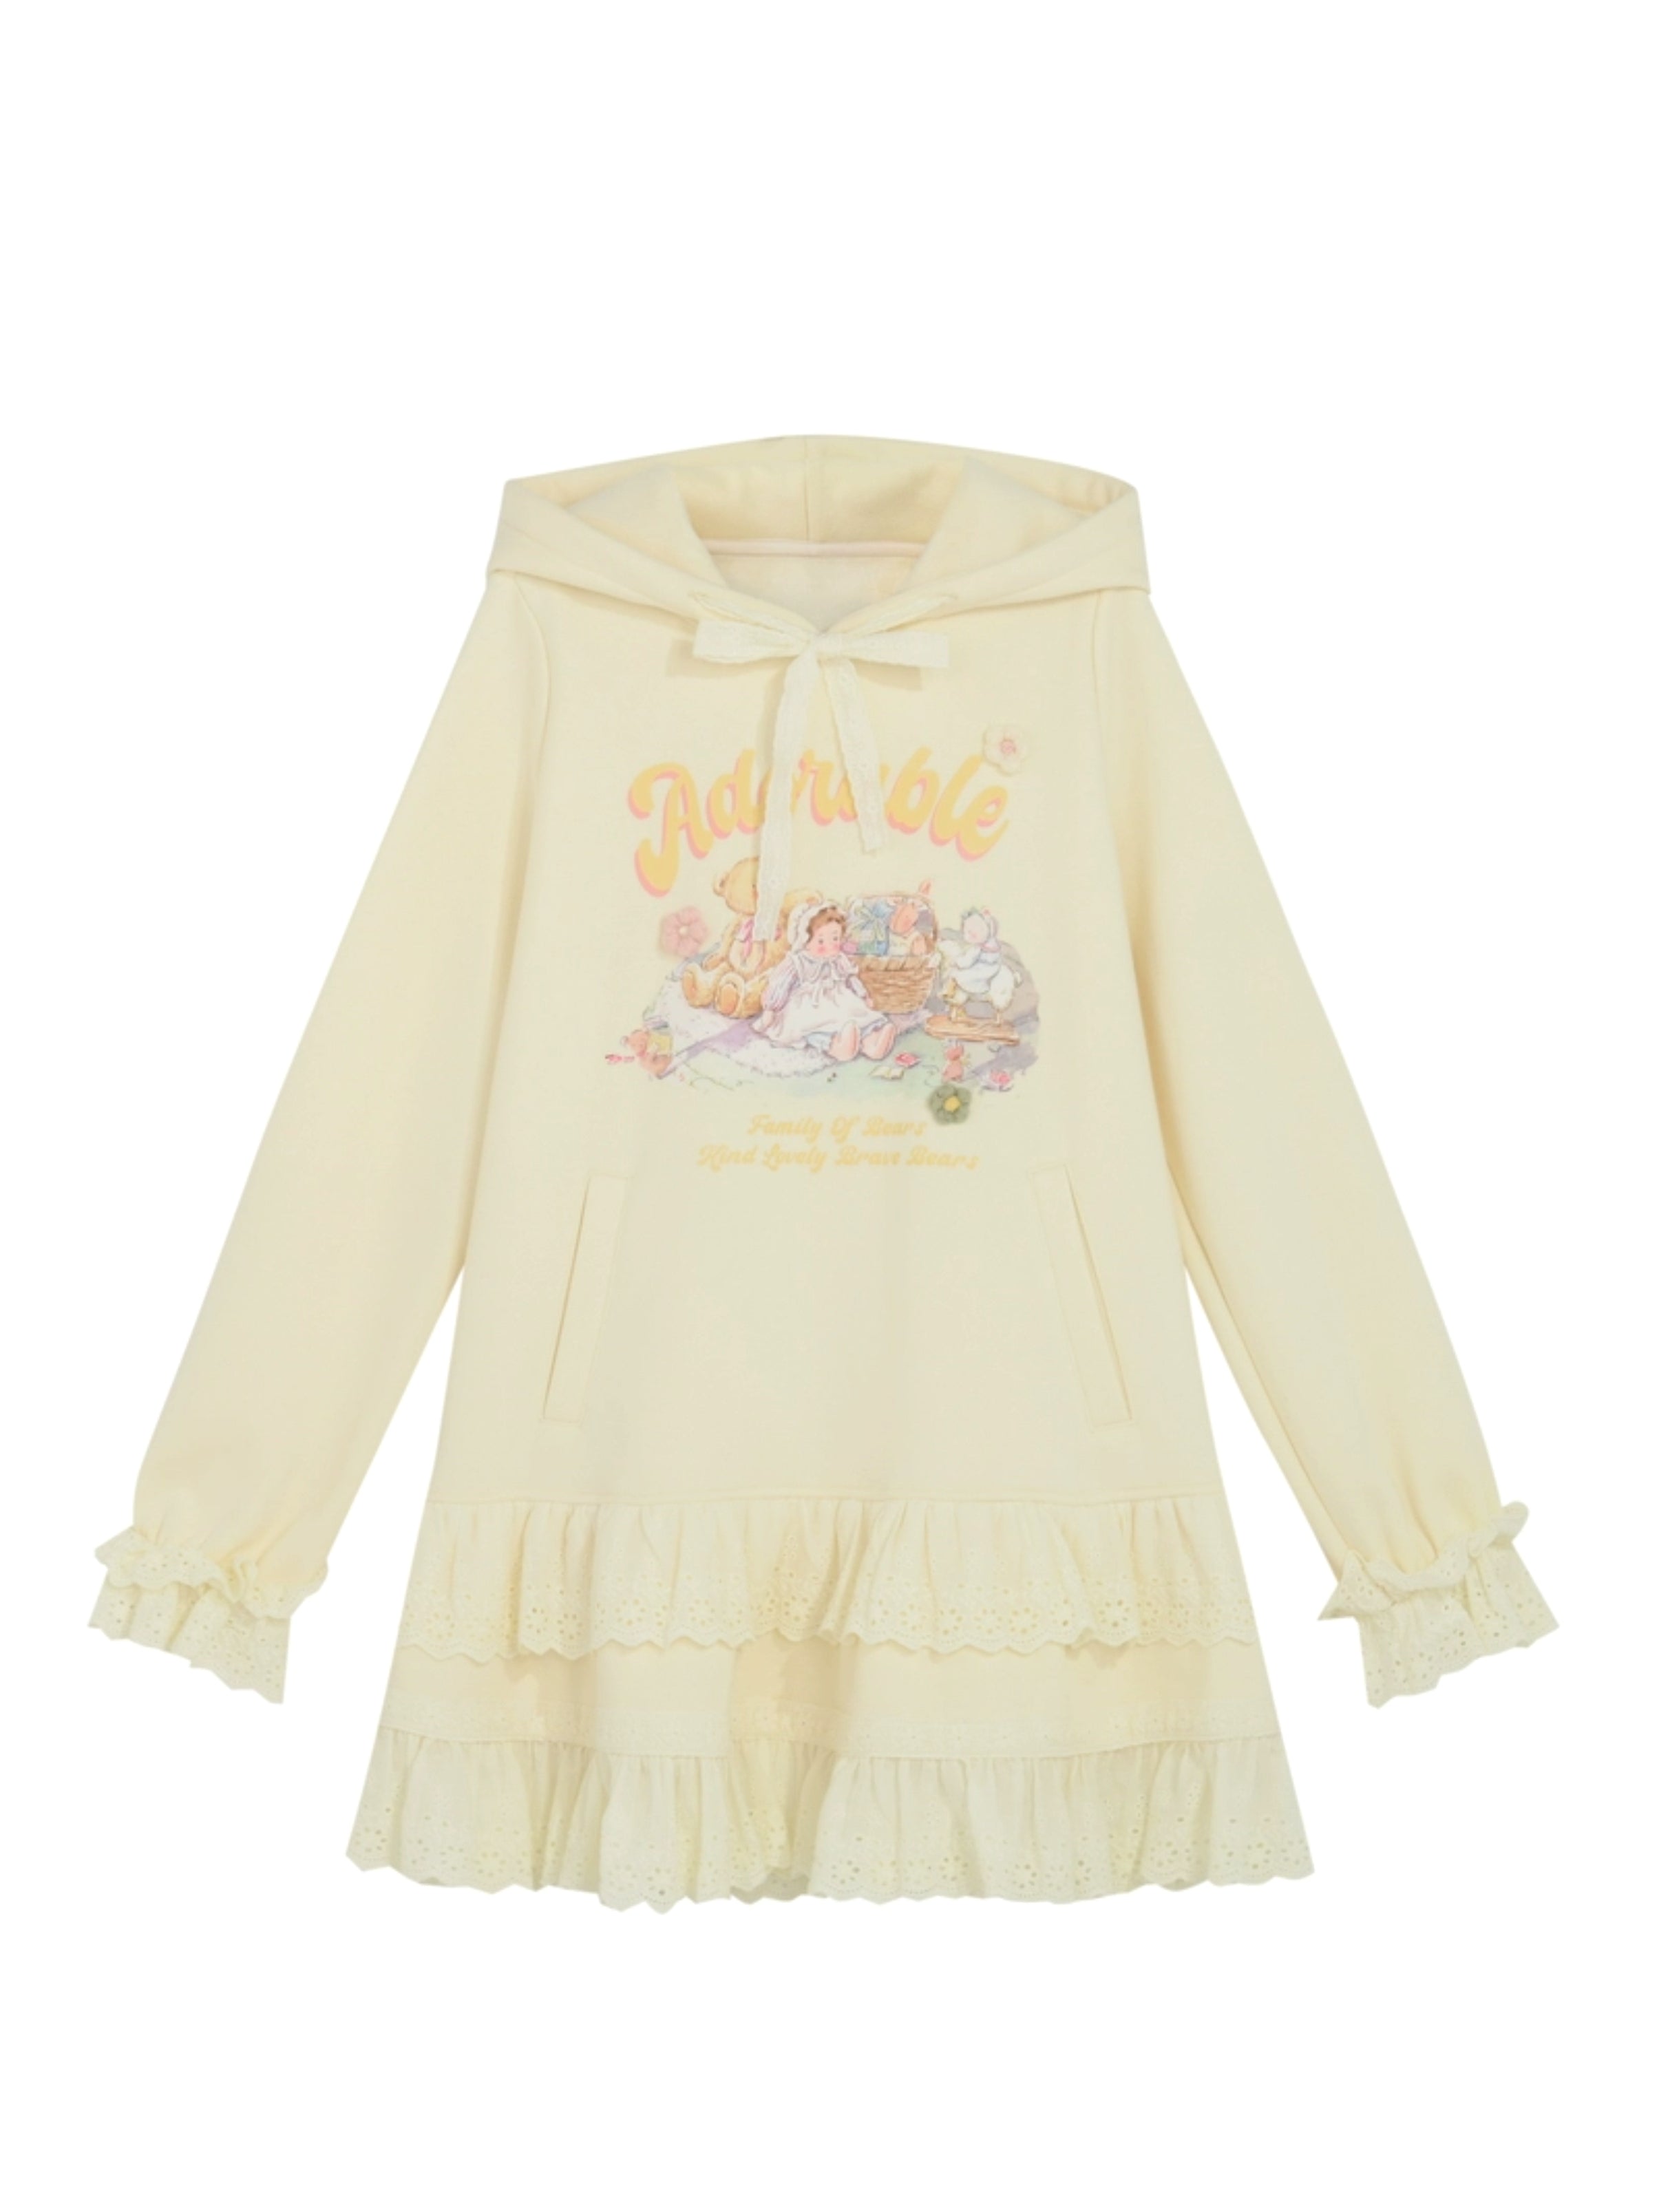 Family of Bears Cute Oil Painting Hooded Dress-ntbhshop